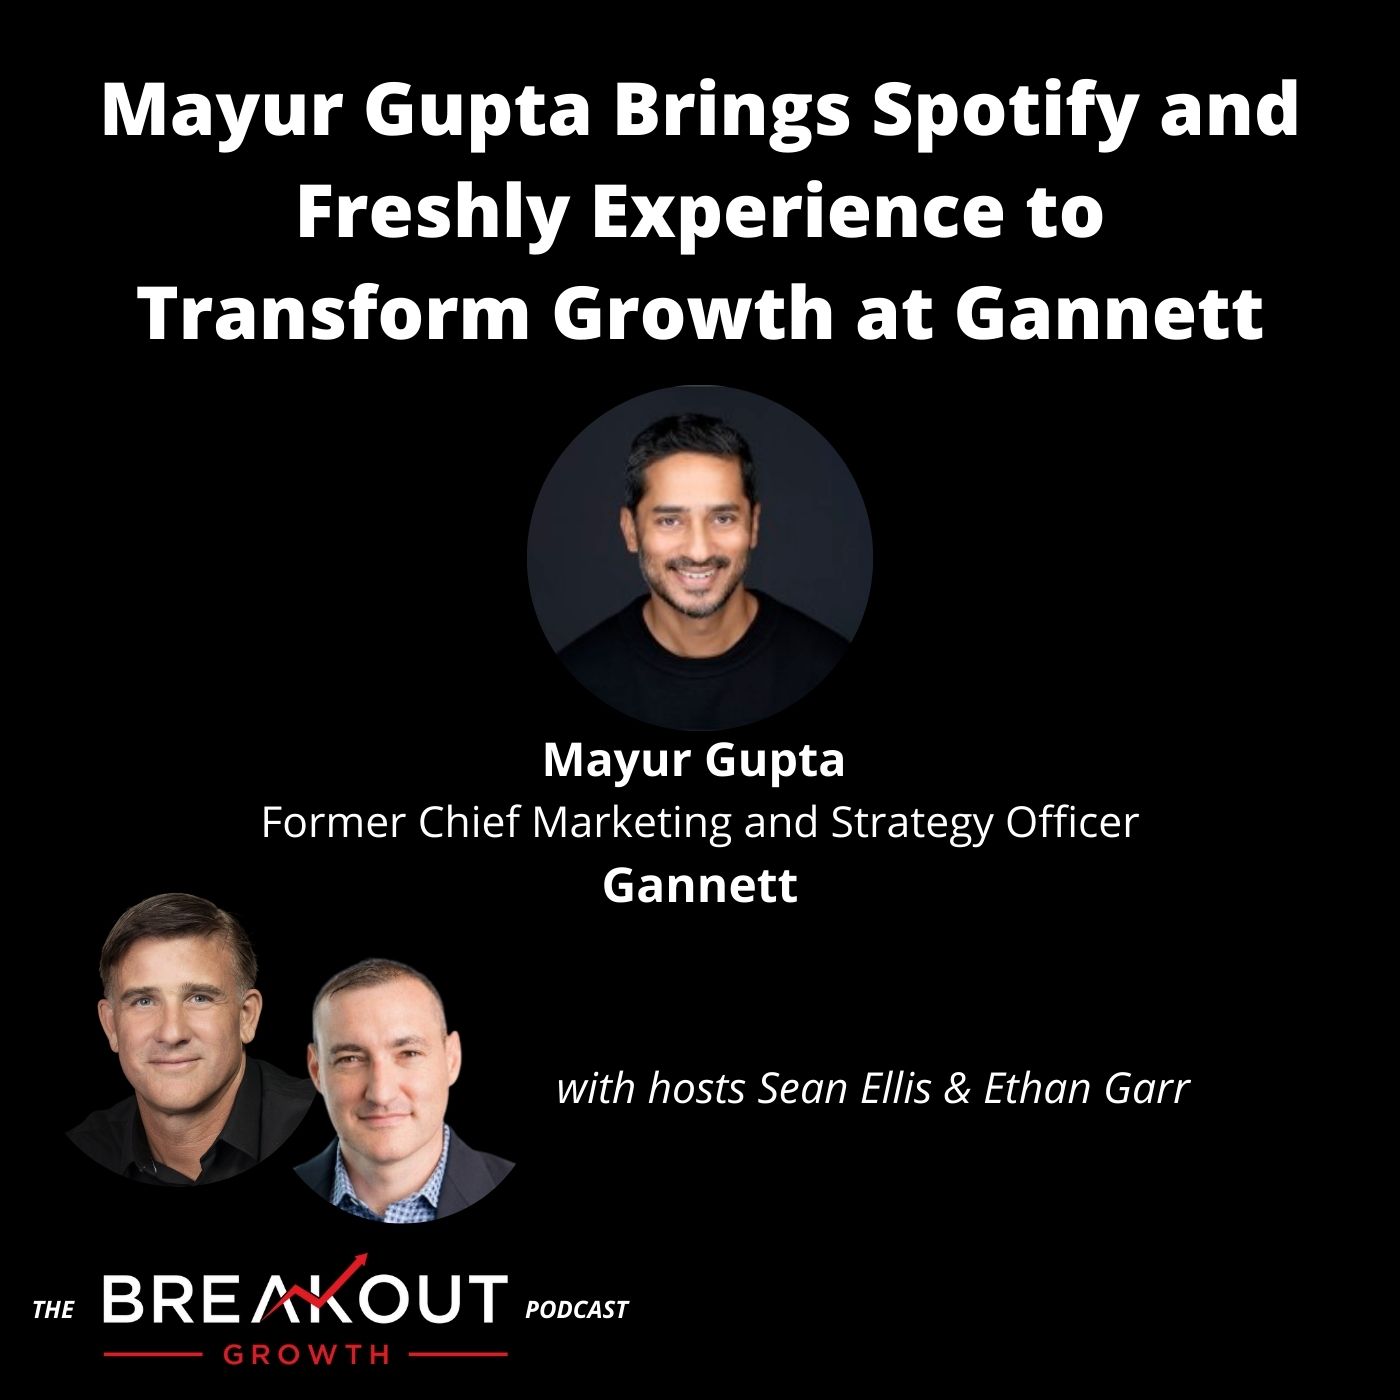 Mayur Gupta Brings Spotify and Freshly Experience to Transform Growth at Gannett